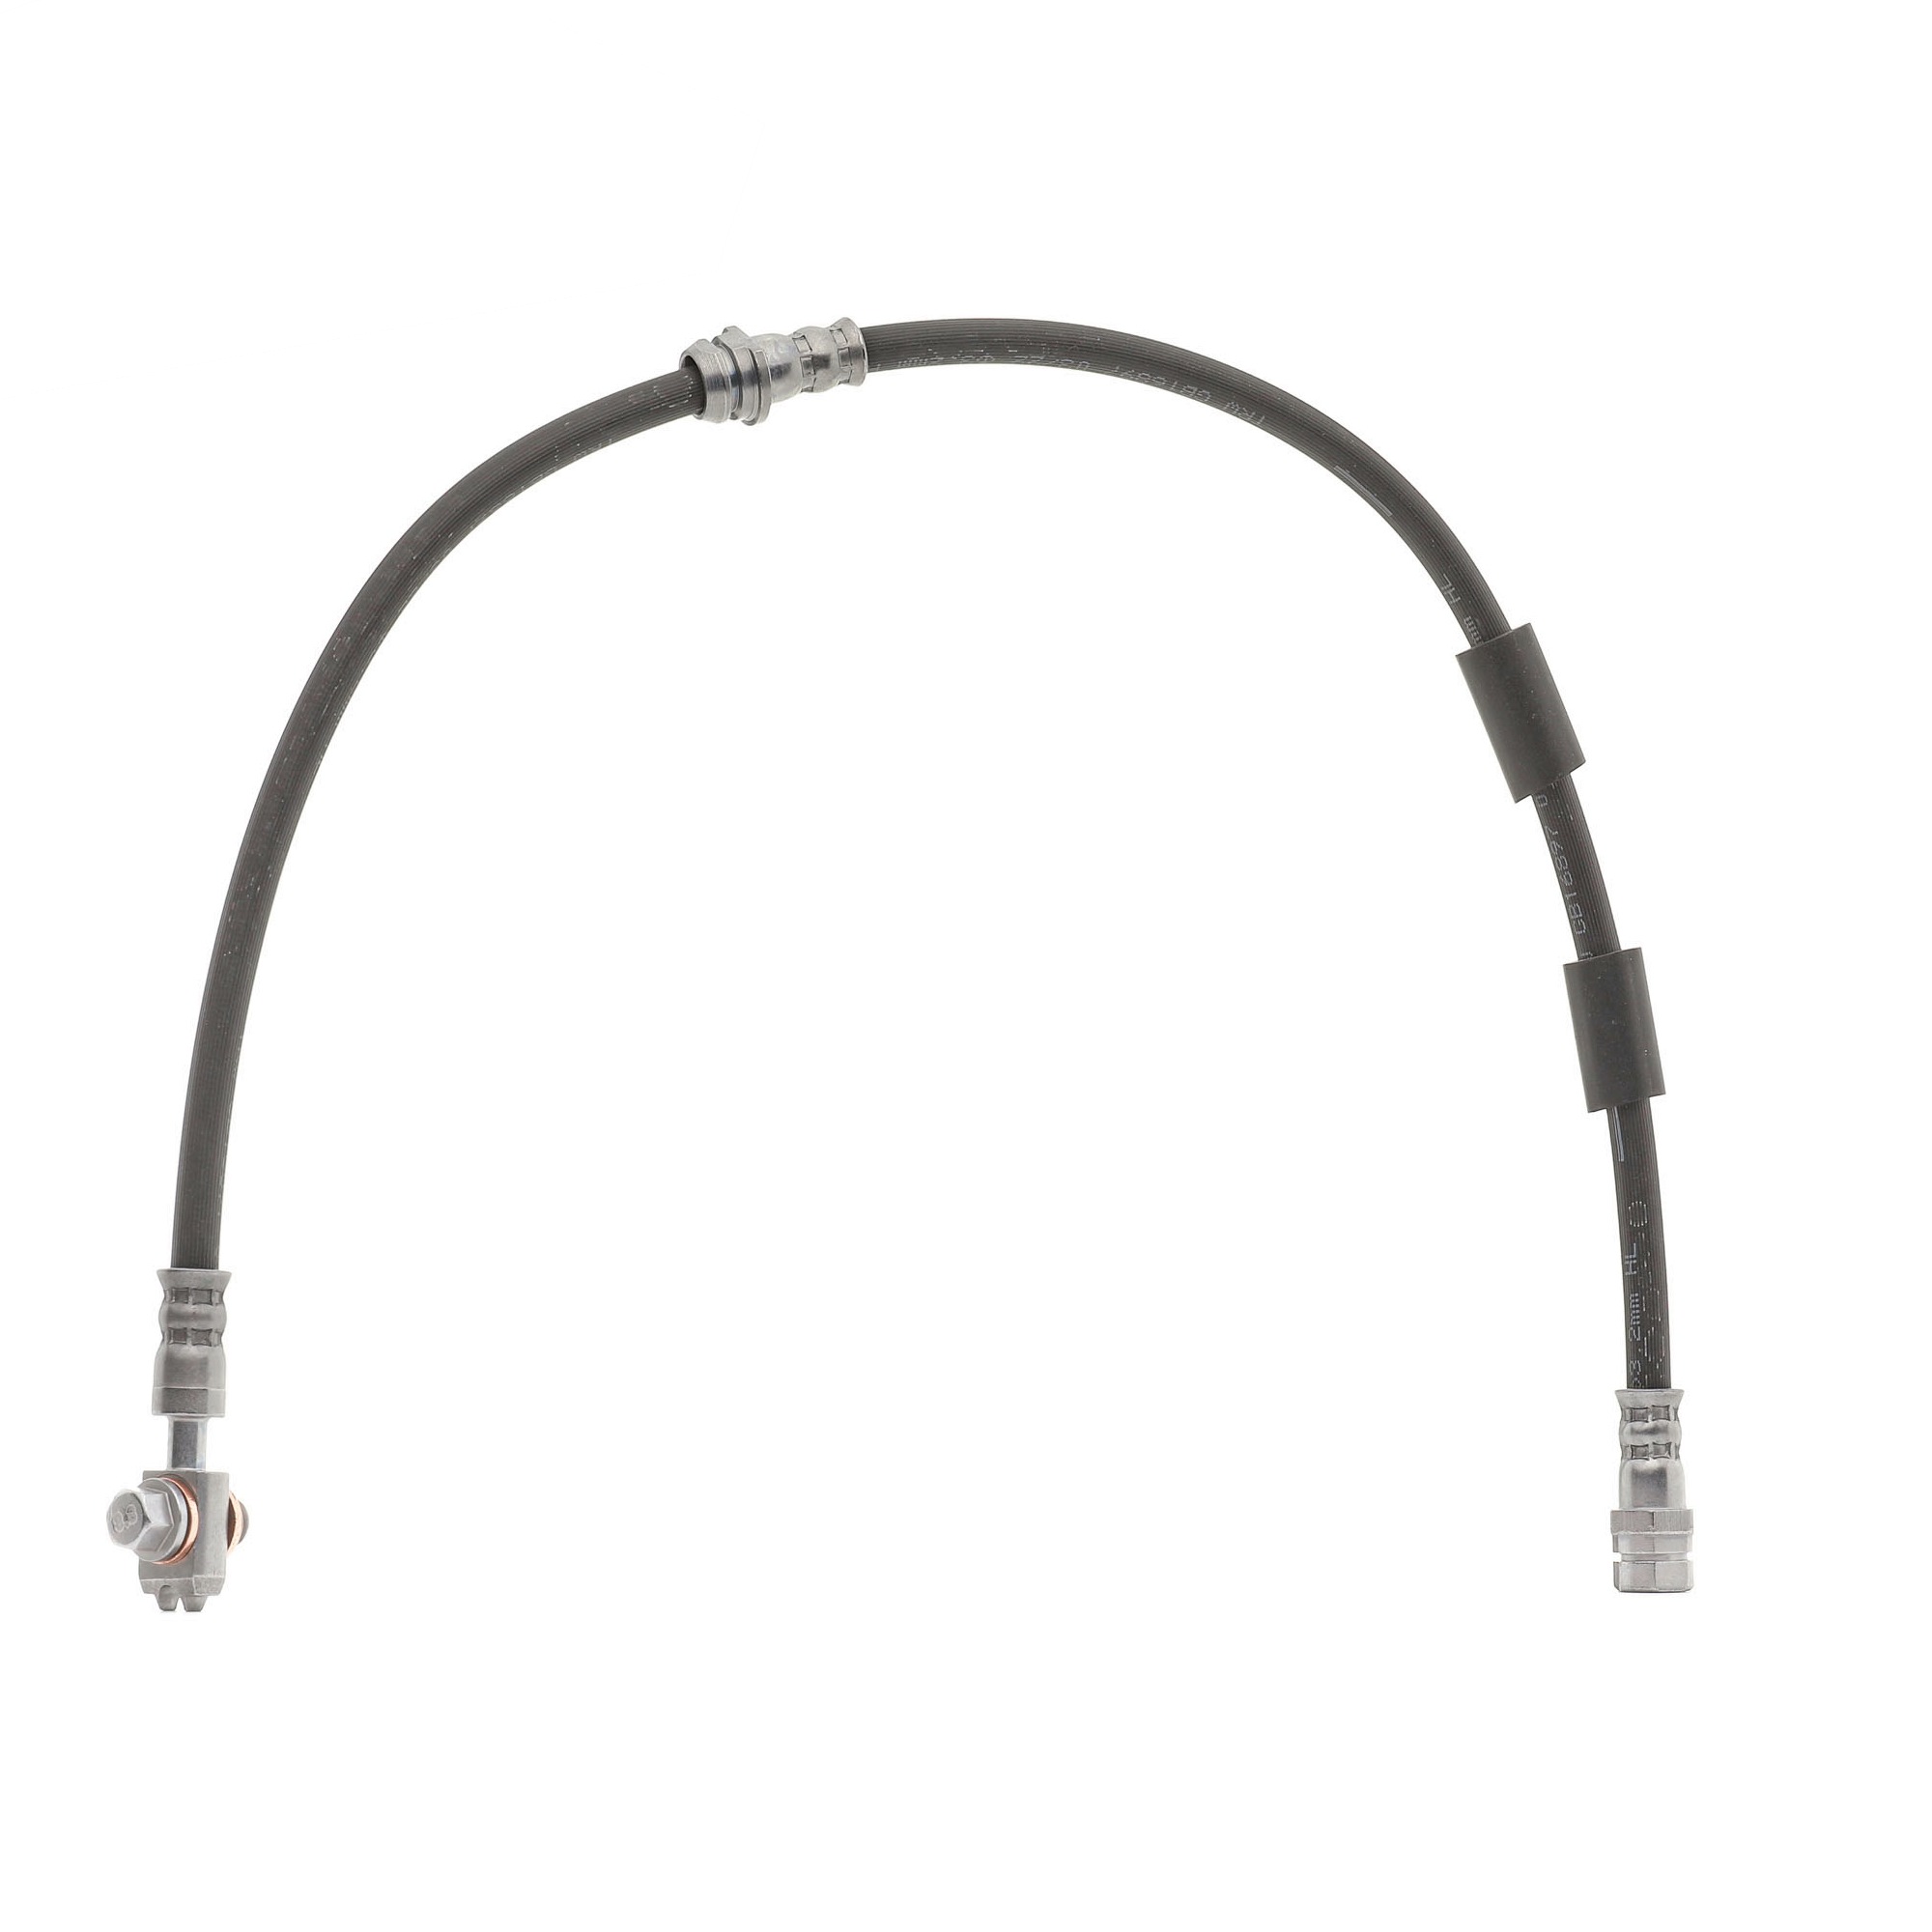 Buy Brake hose TRW PHD2018 - Pipes and hoses parts Seat Leon 3 ST online